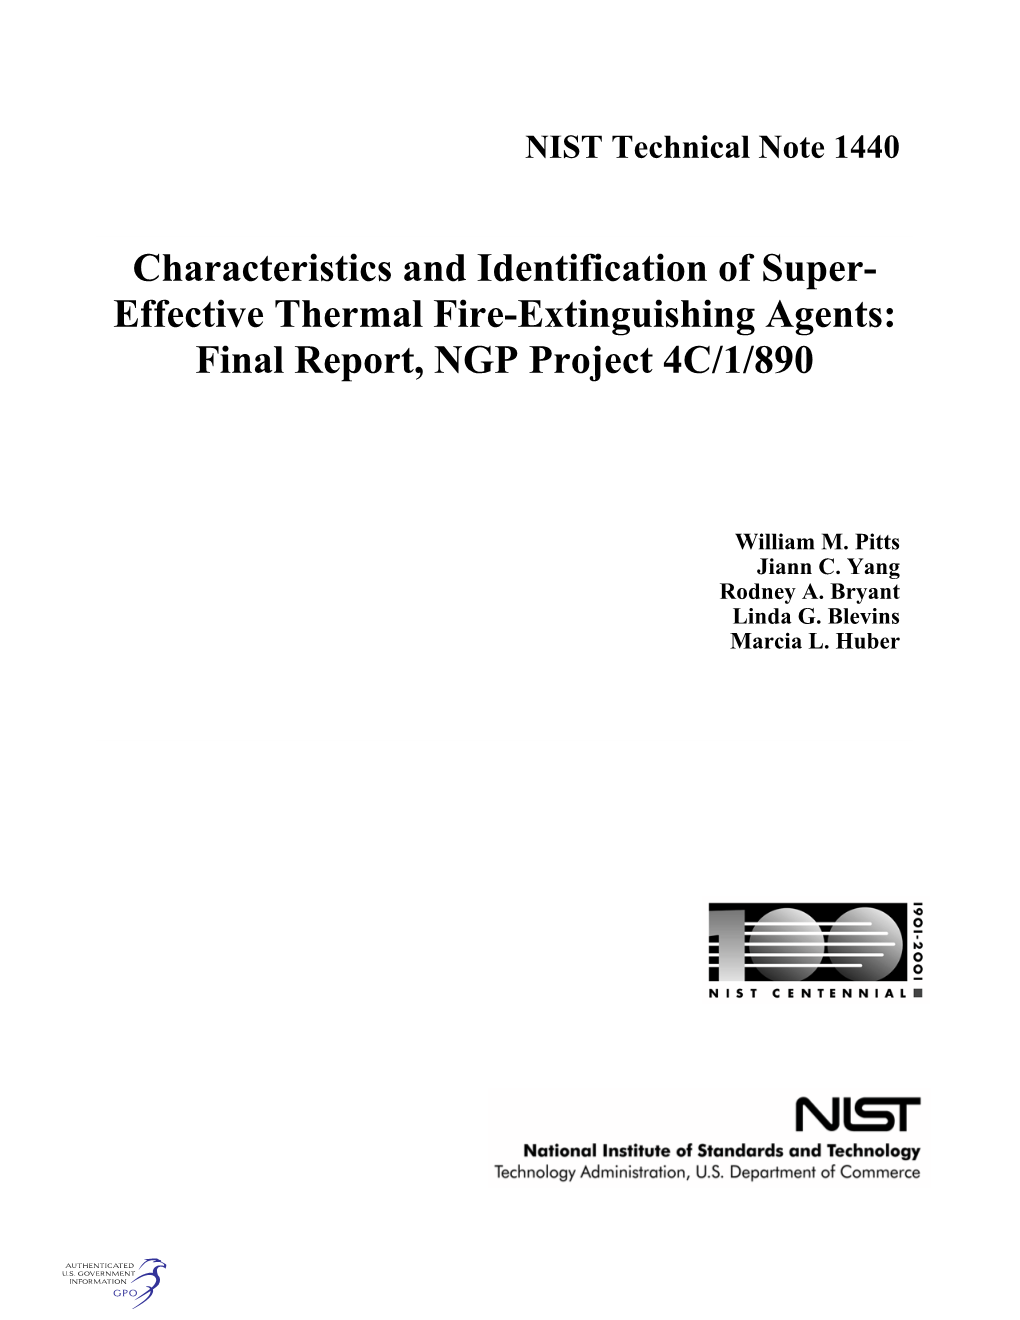 Characterization and Identification of Super-Effective Thermal Fire